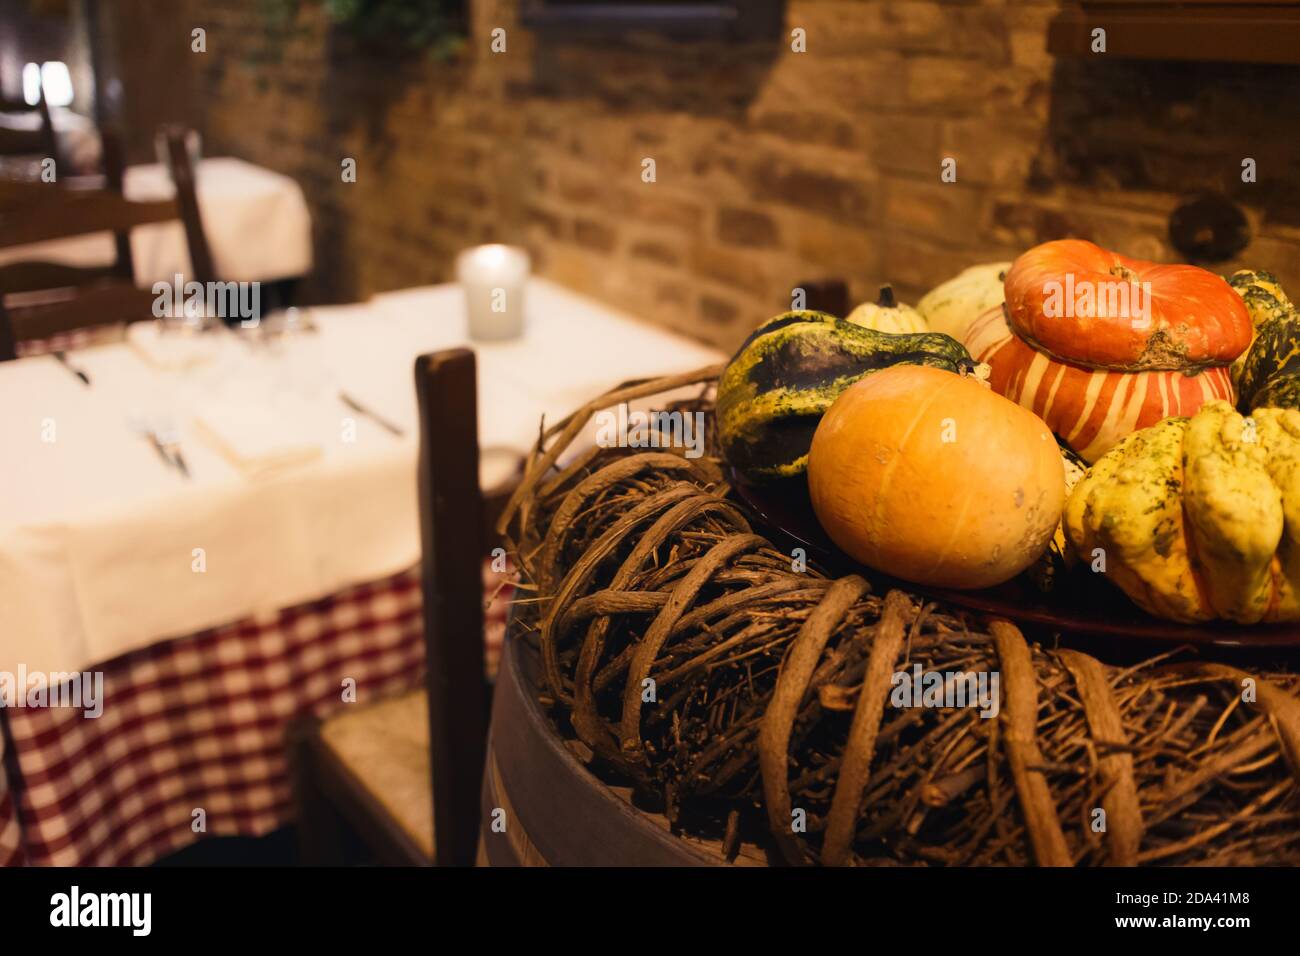 decorative pumpkins in autumn season near the tables of an italian rustic restaurant room with prepared tablecloths Stock Photo